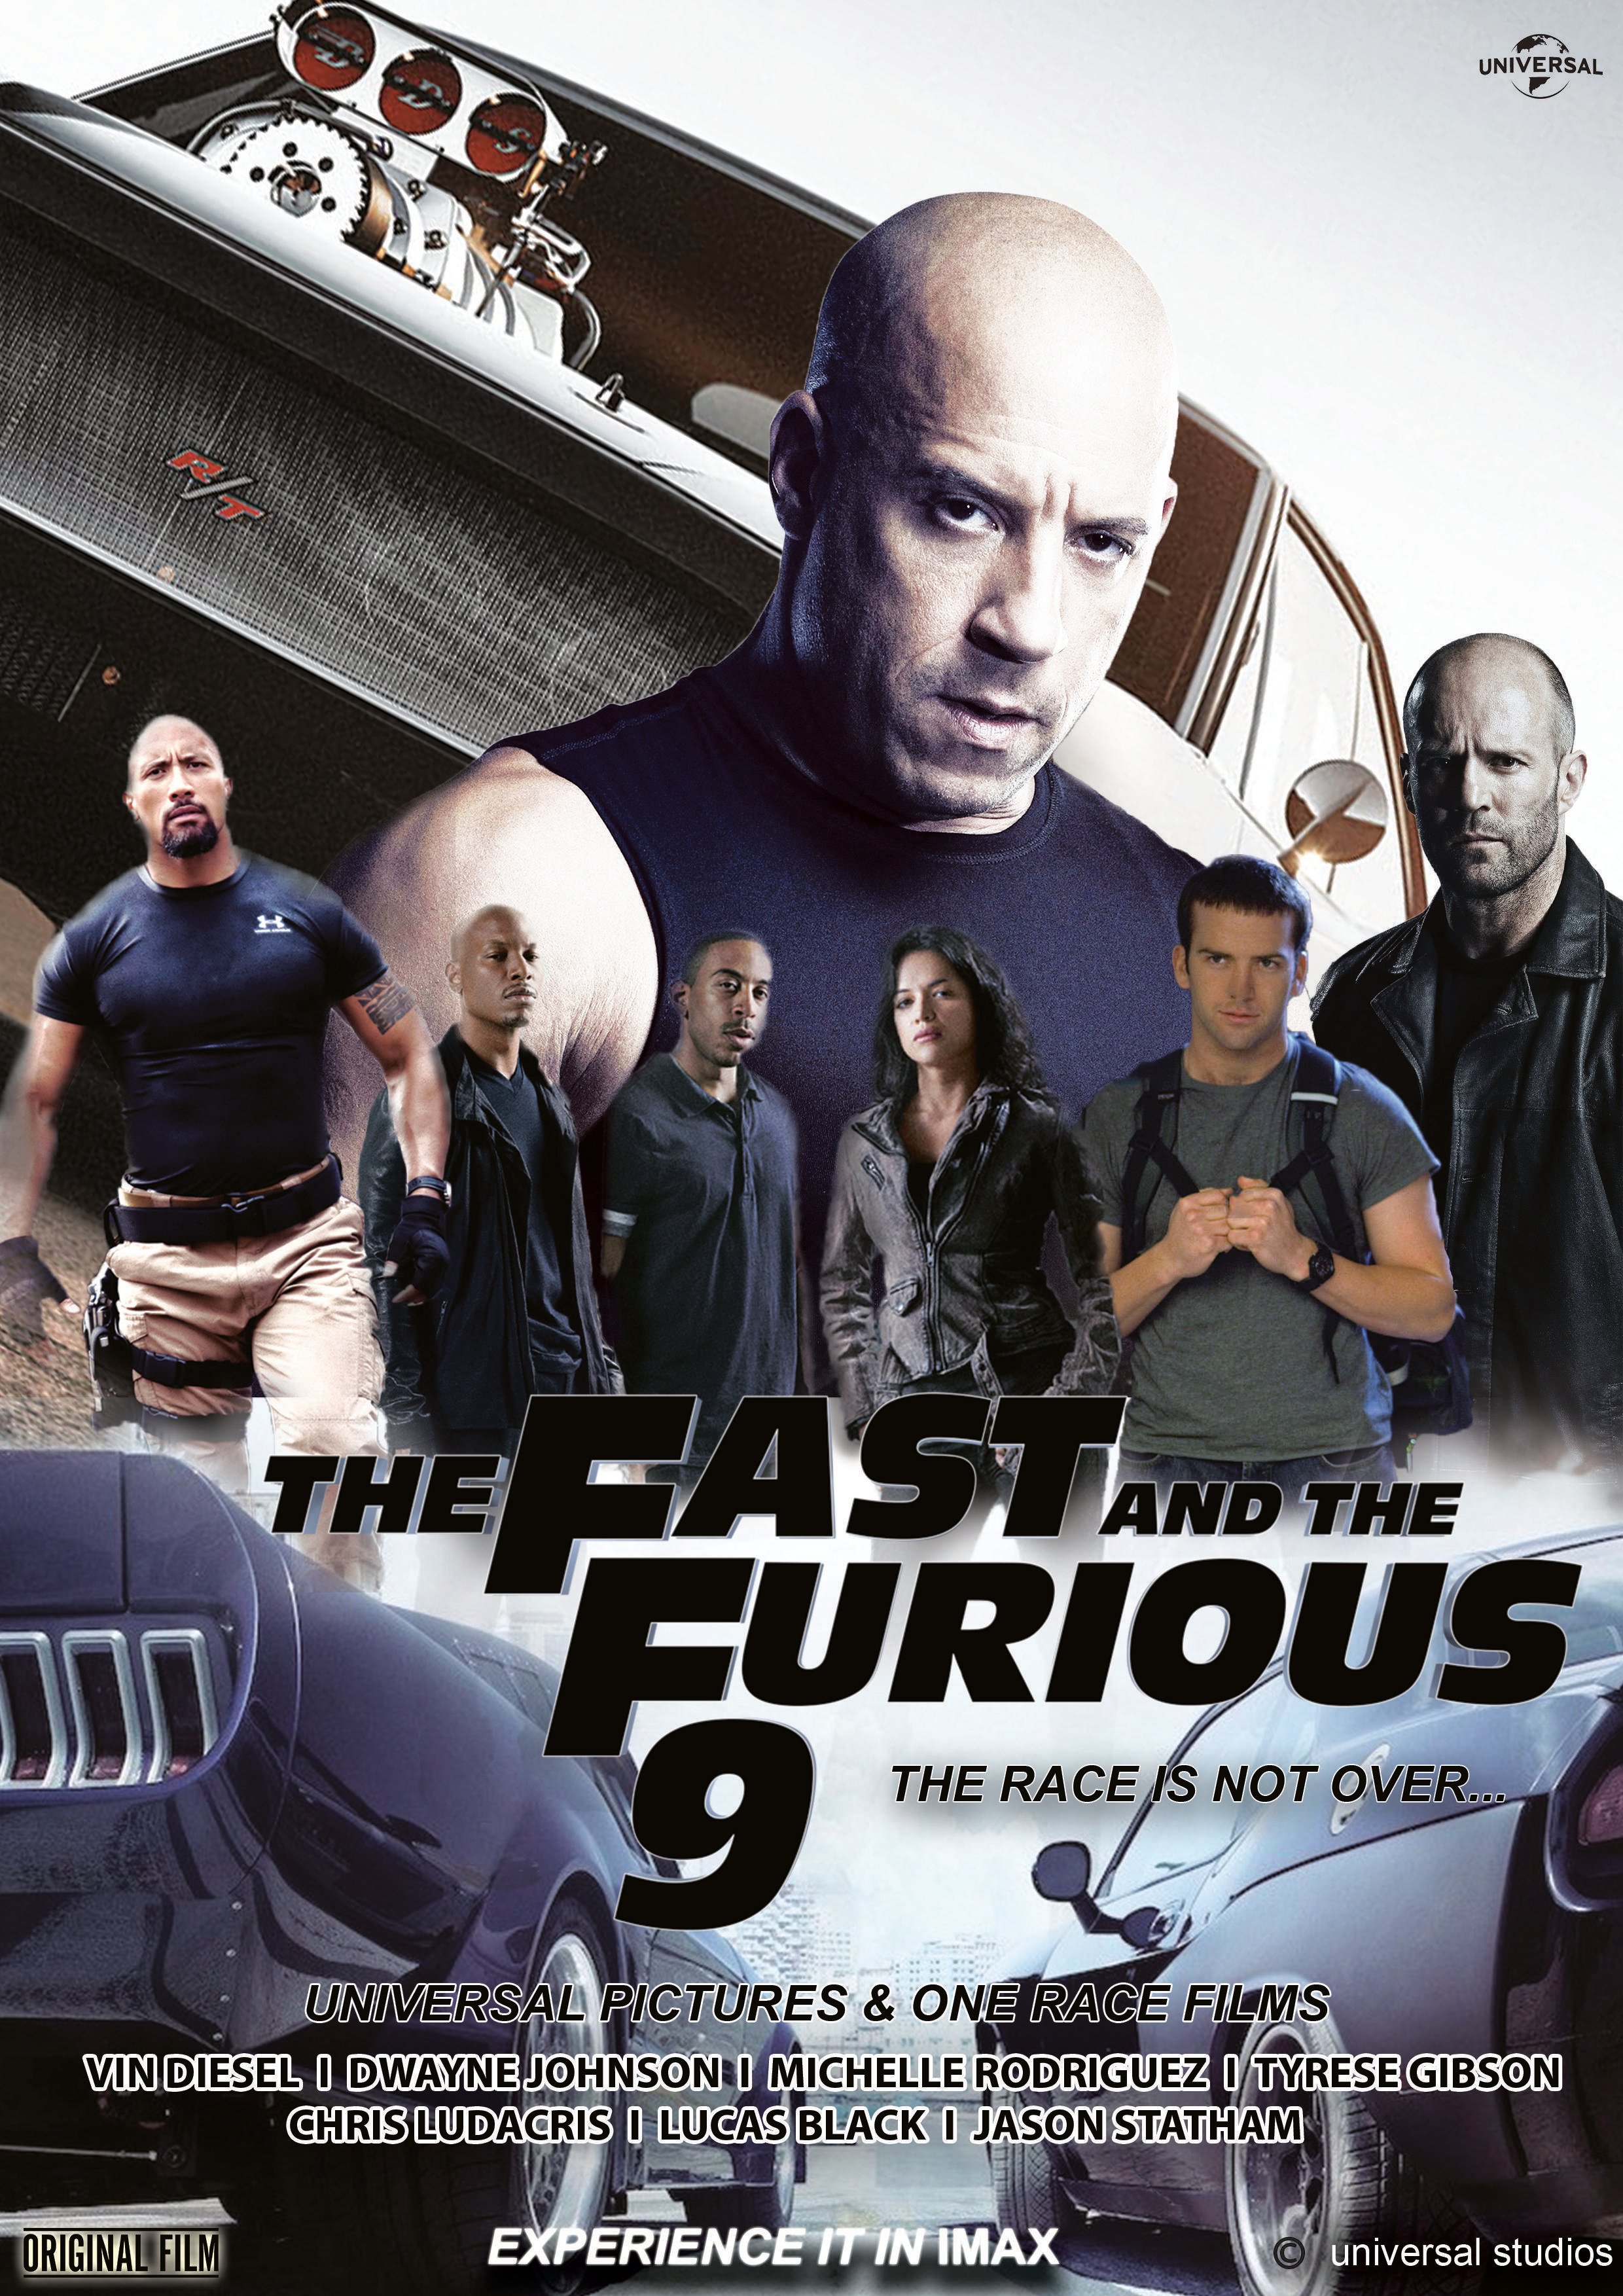 Poster design of The Fast & the Furious 9...